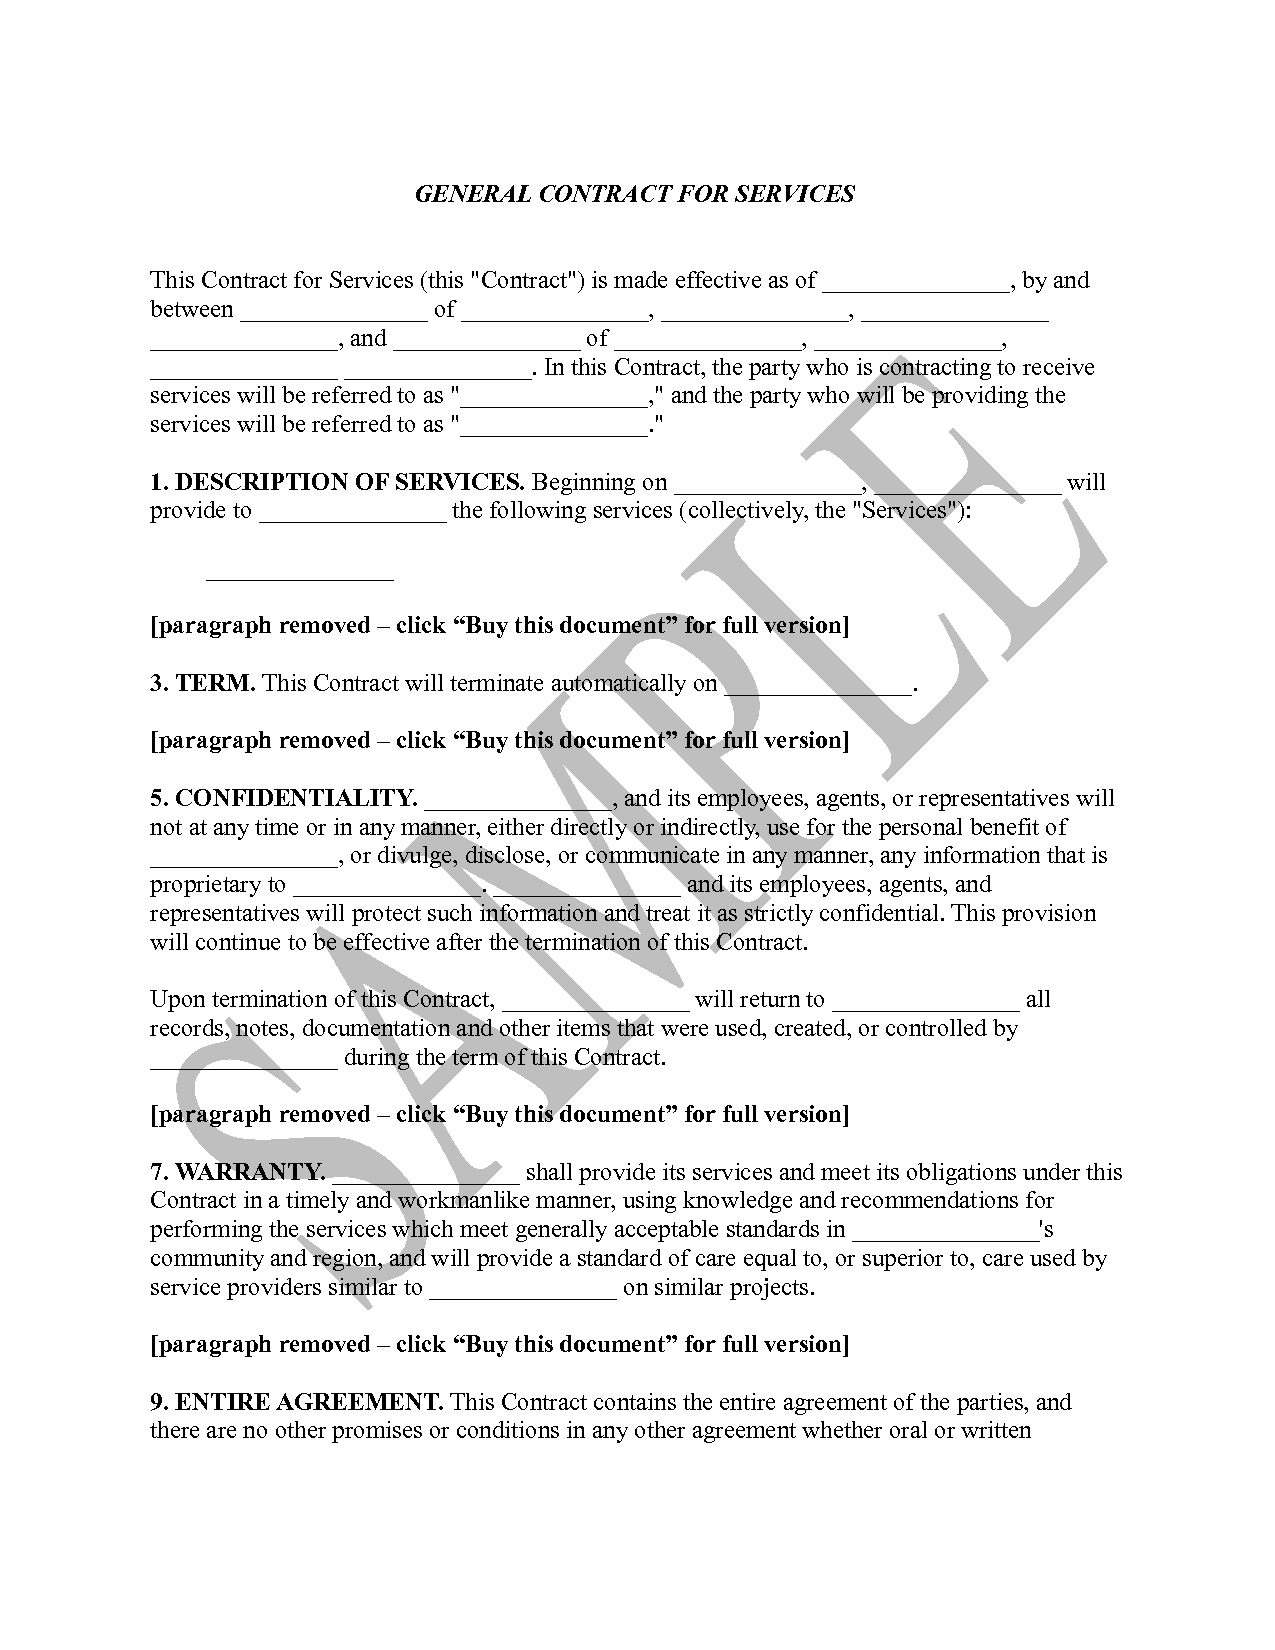 General Contract For Services Template Free Printable Documents